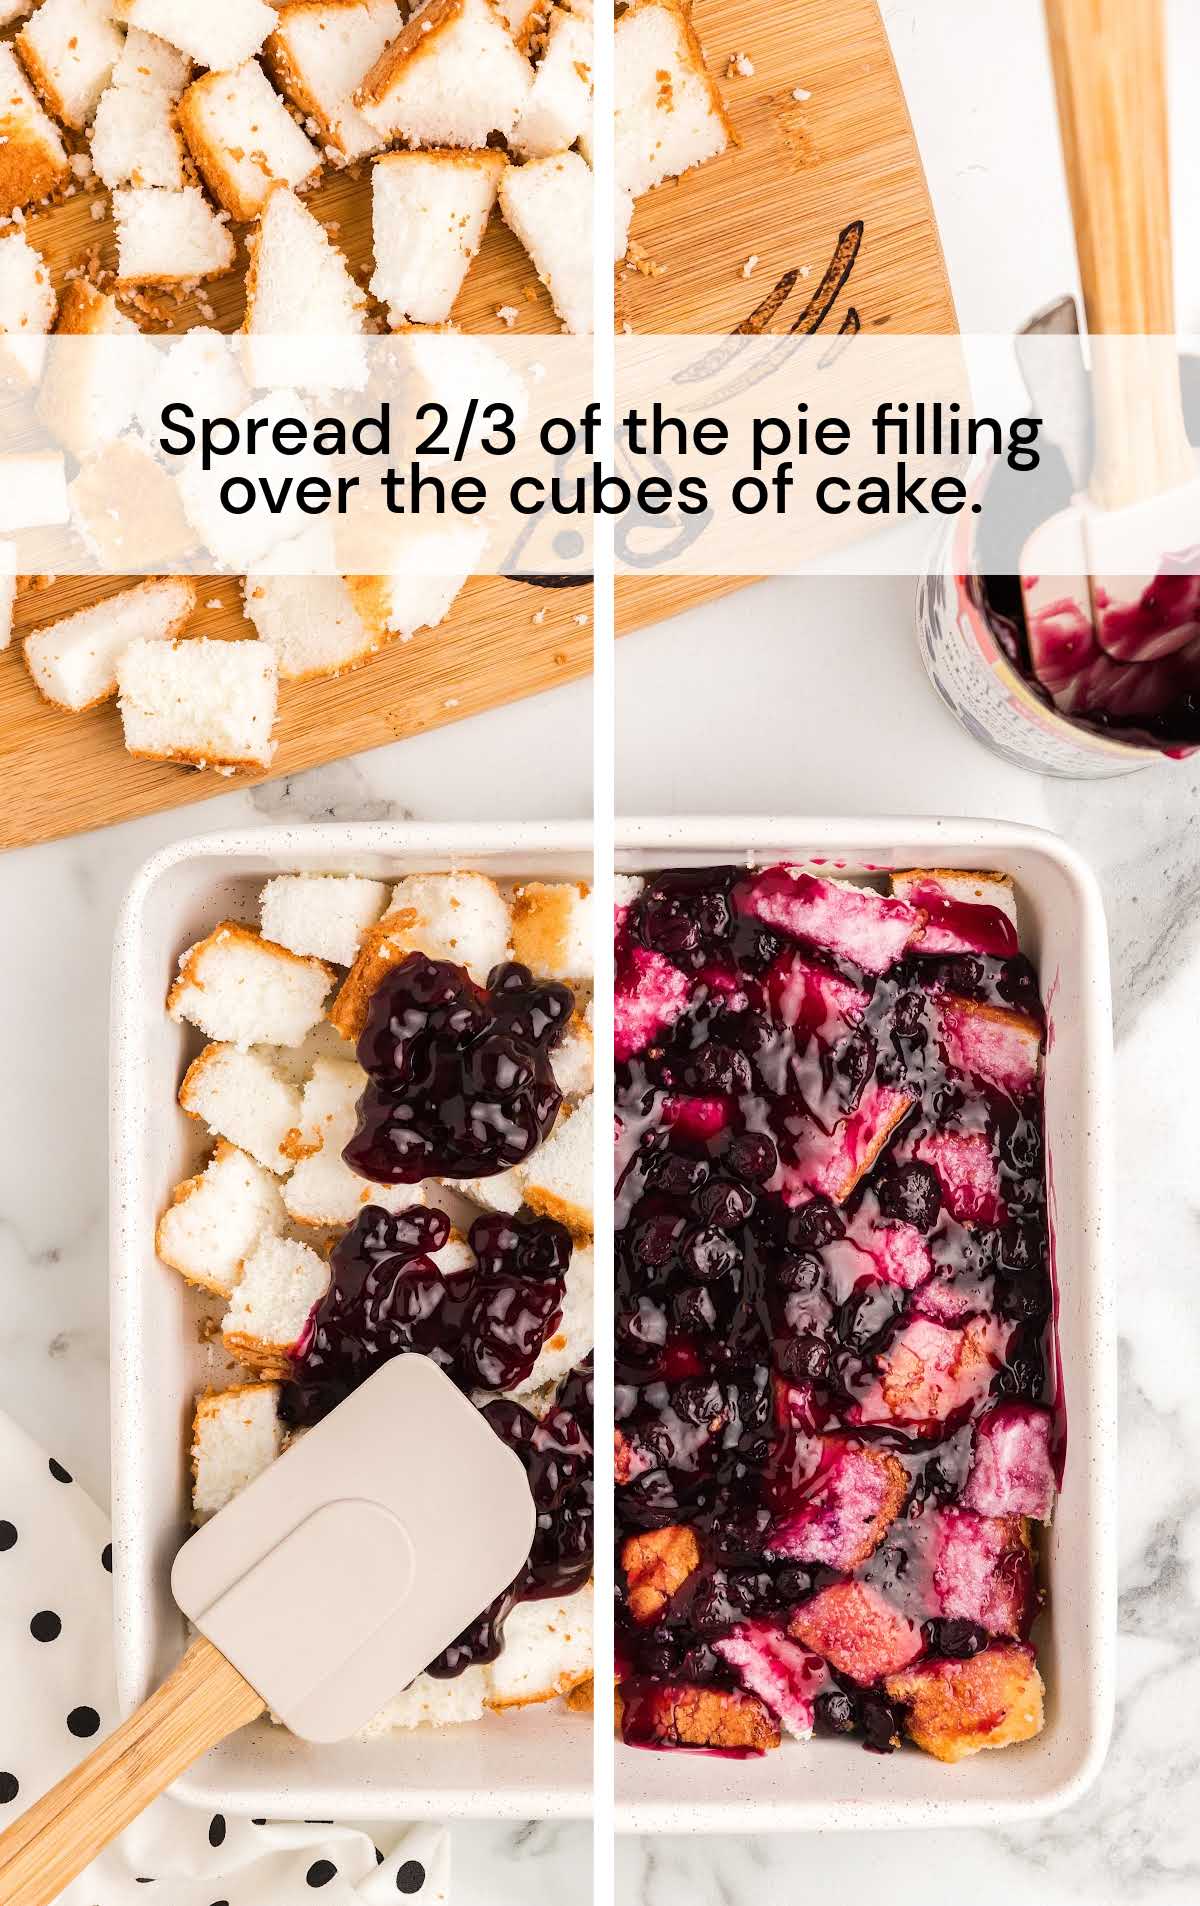 pie filling spread over the cubes of cake in a baking dish